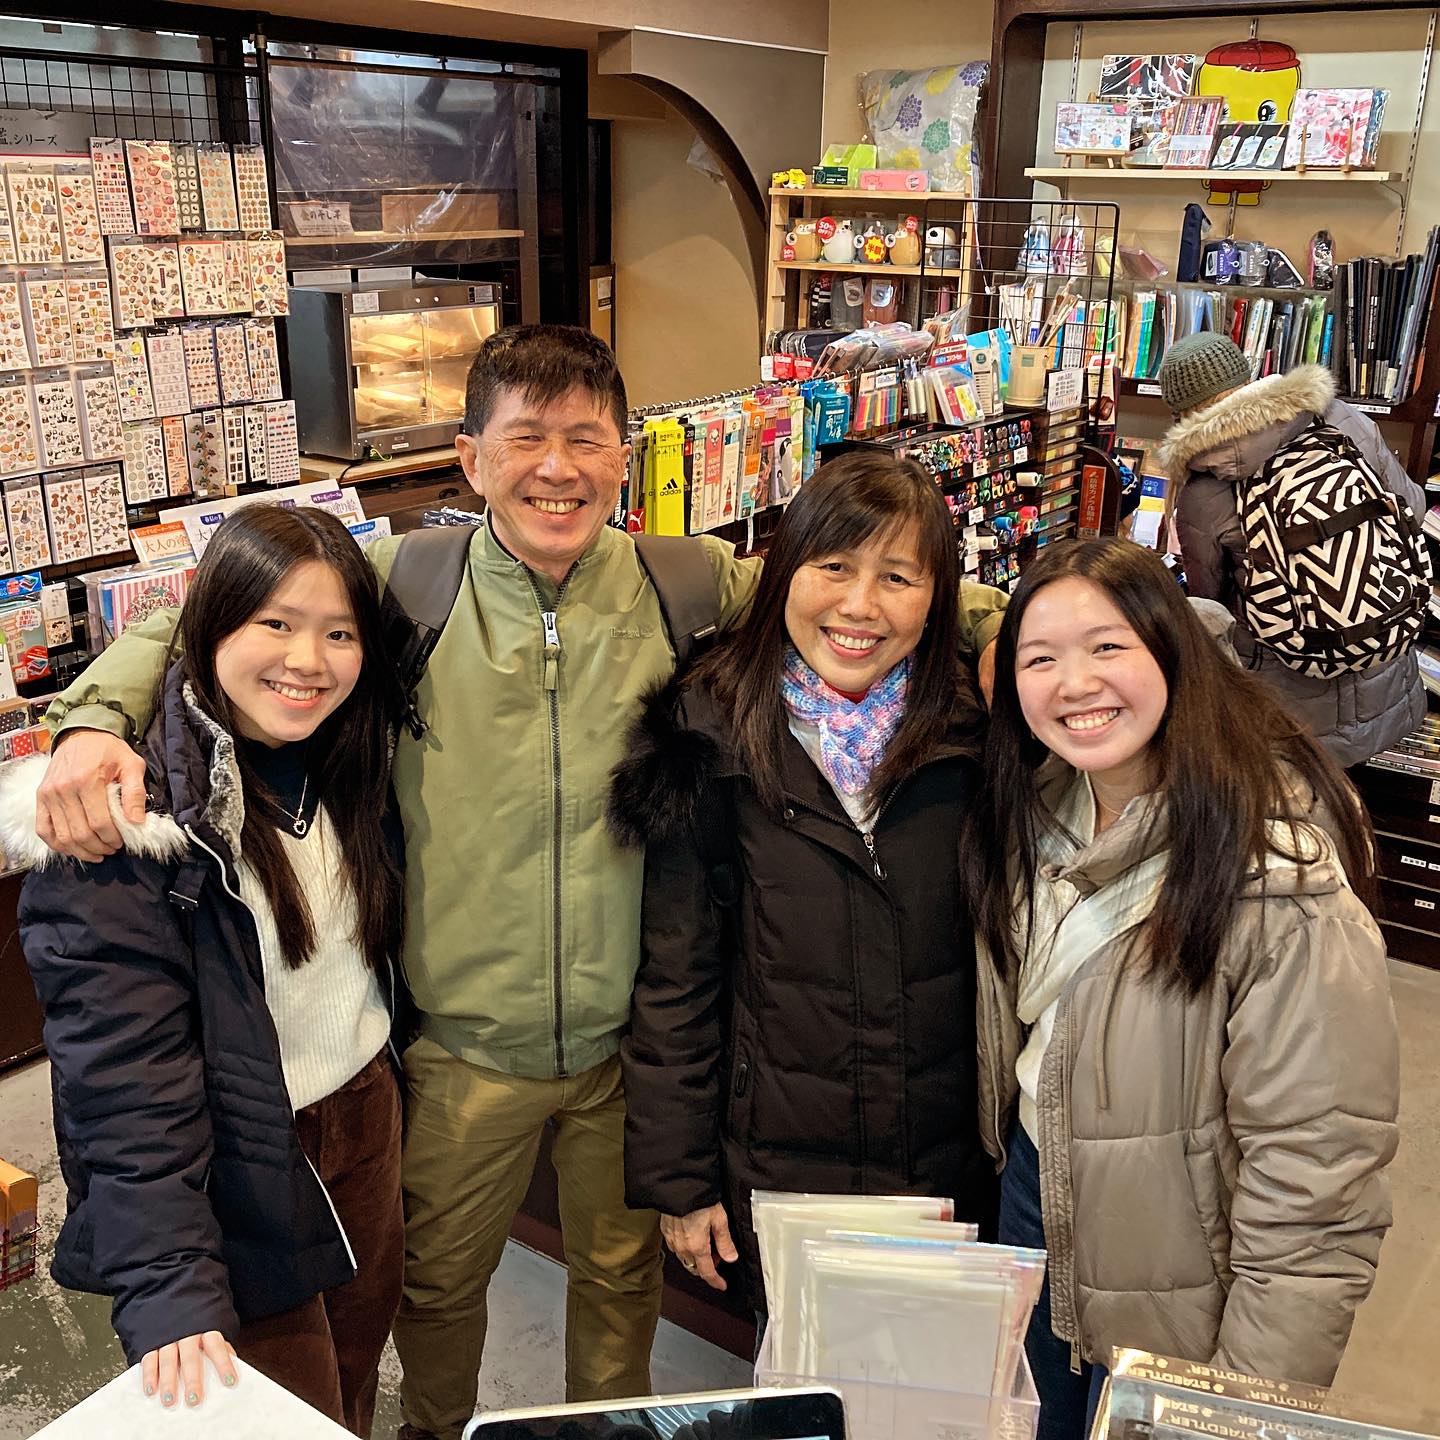 Thanks for shopping with us!They are from Singapore! I haven’t been there for a long time… I miss Hainan chicken rice! always enjoy having chat with happy family! Hope you guys enjoy the rest of your trip!Keep warm! Don’t sweat!Happy new year ️#office7maeda #kyotostationery #singapore #hainanchickenrice #kyoto #sightseeing – Instagram